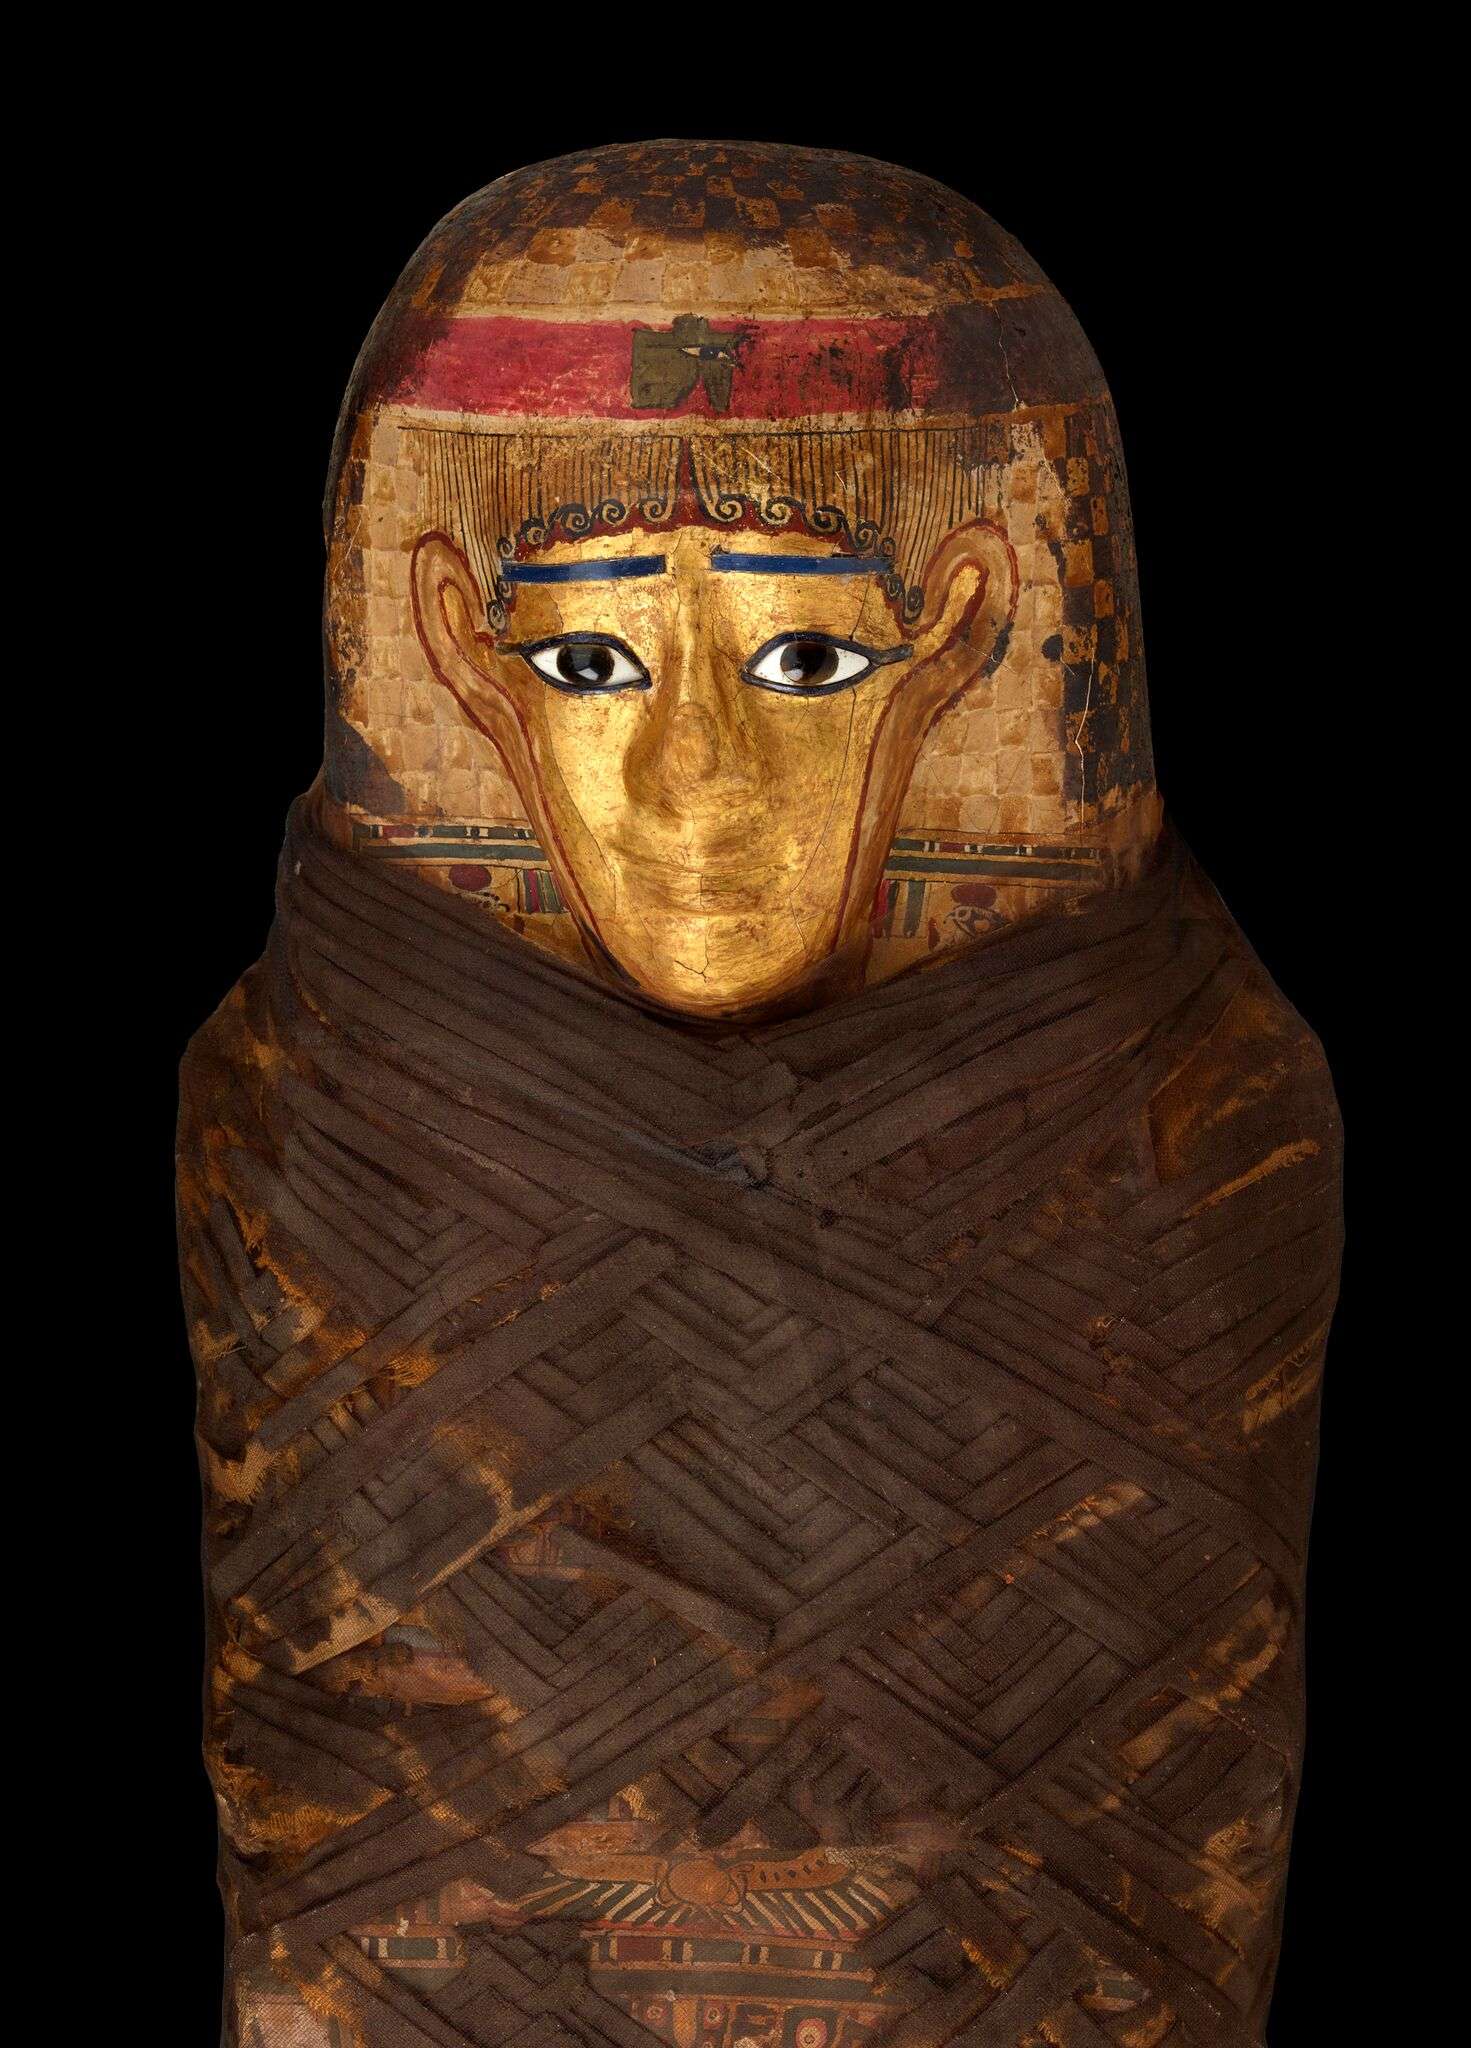 Mummies: Special Exhibit at American Museum of Natural History